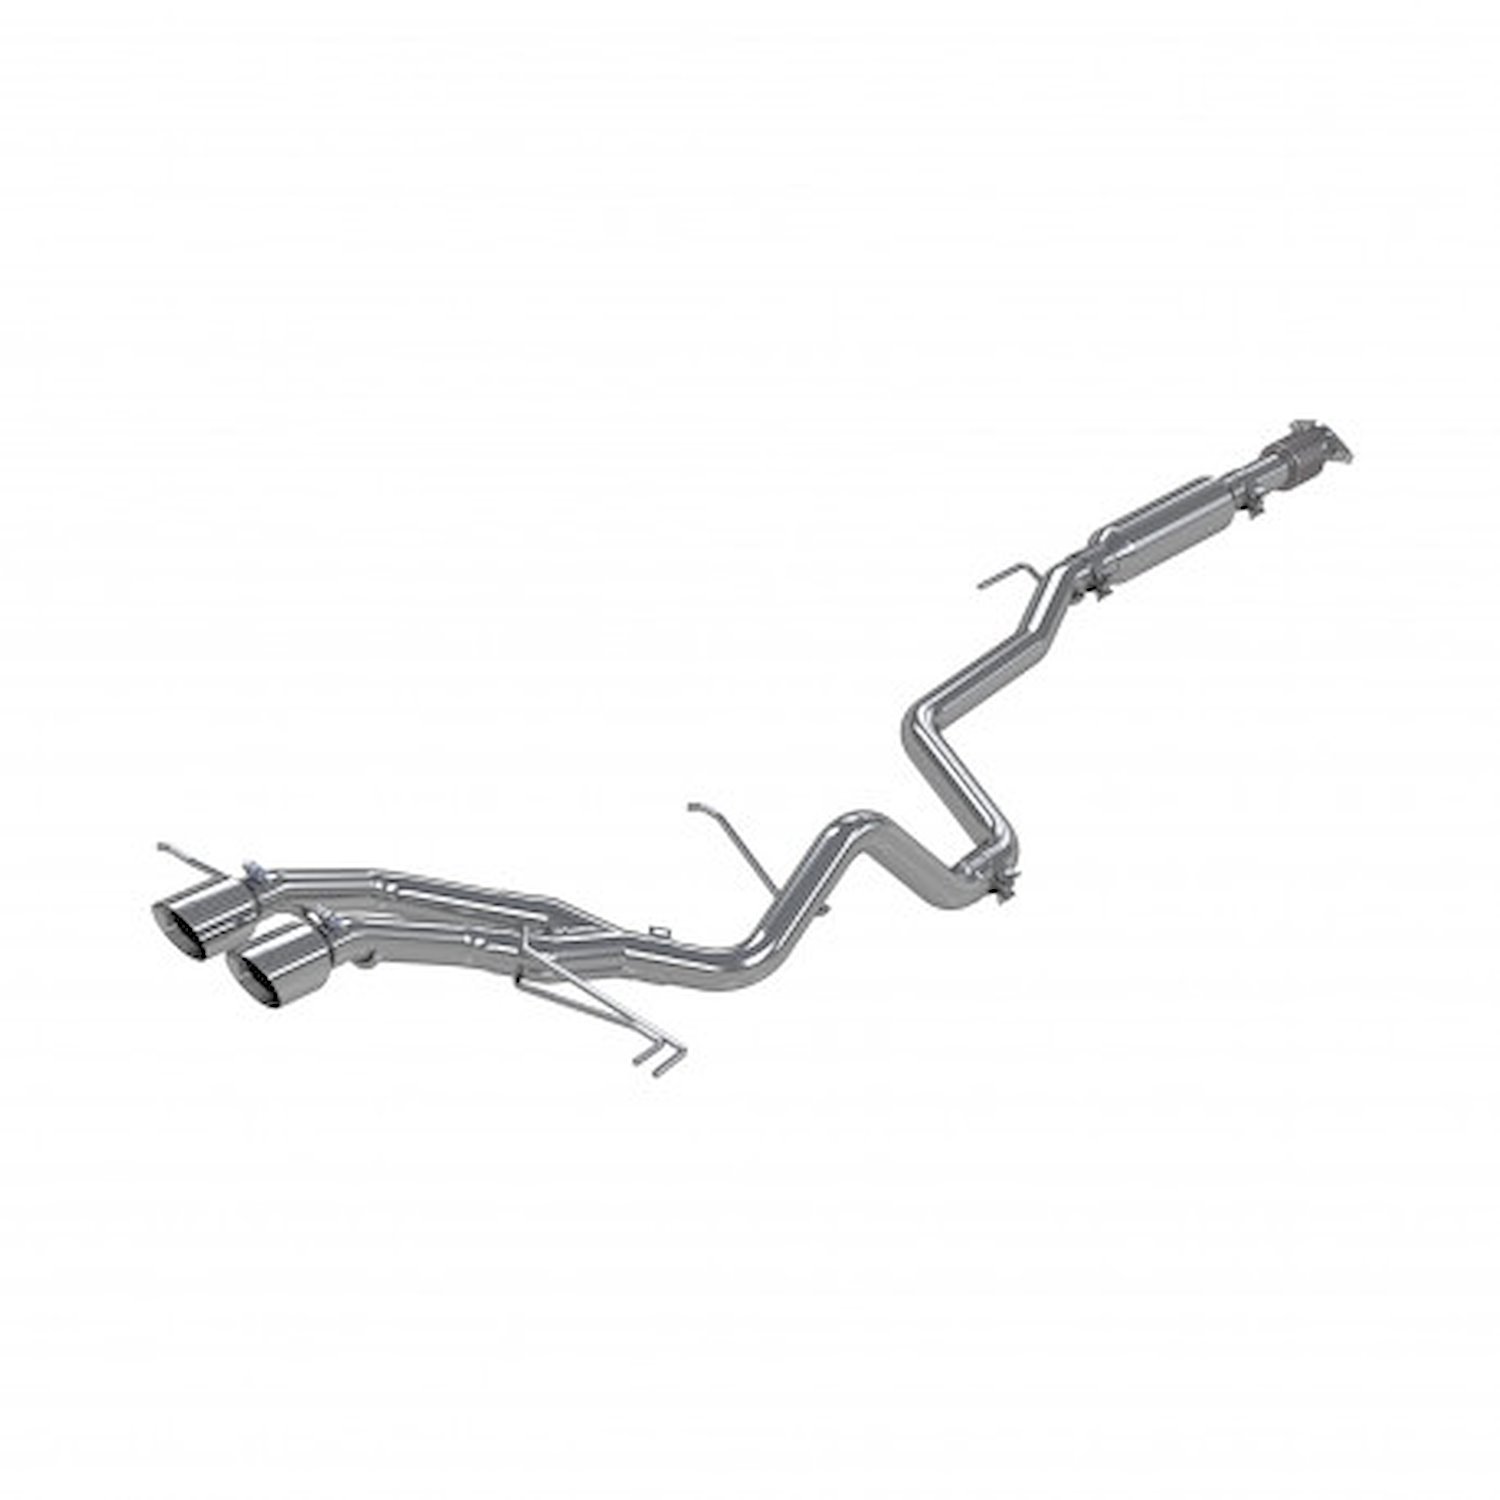 Installer Series Exhaust System for 2013-2018 Fits Hyundai Veloster Turbo